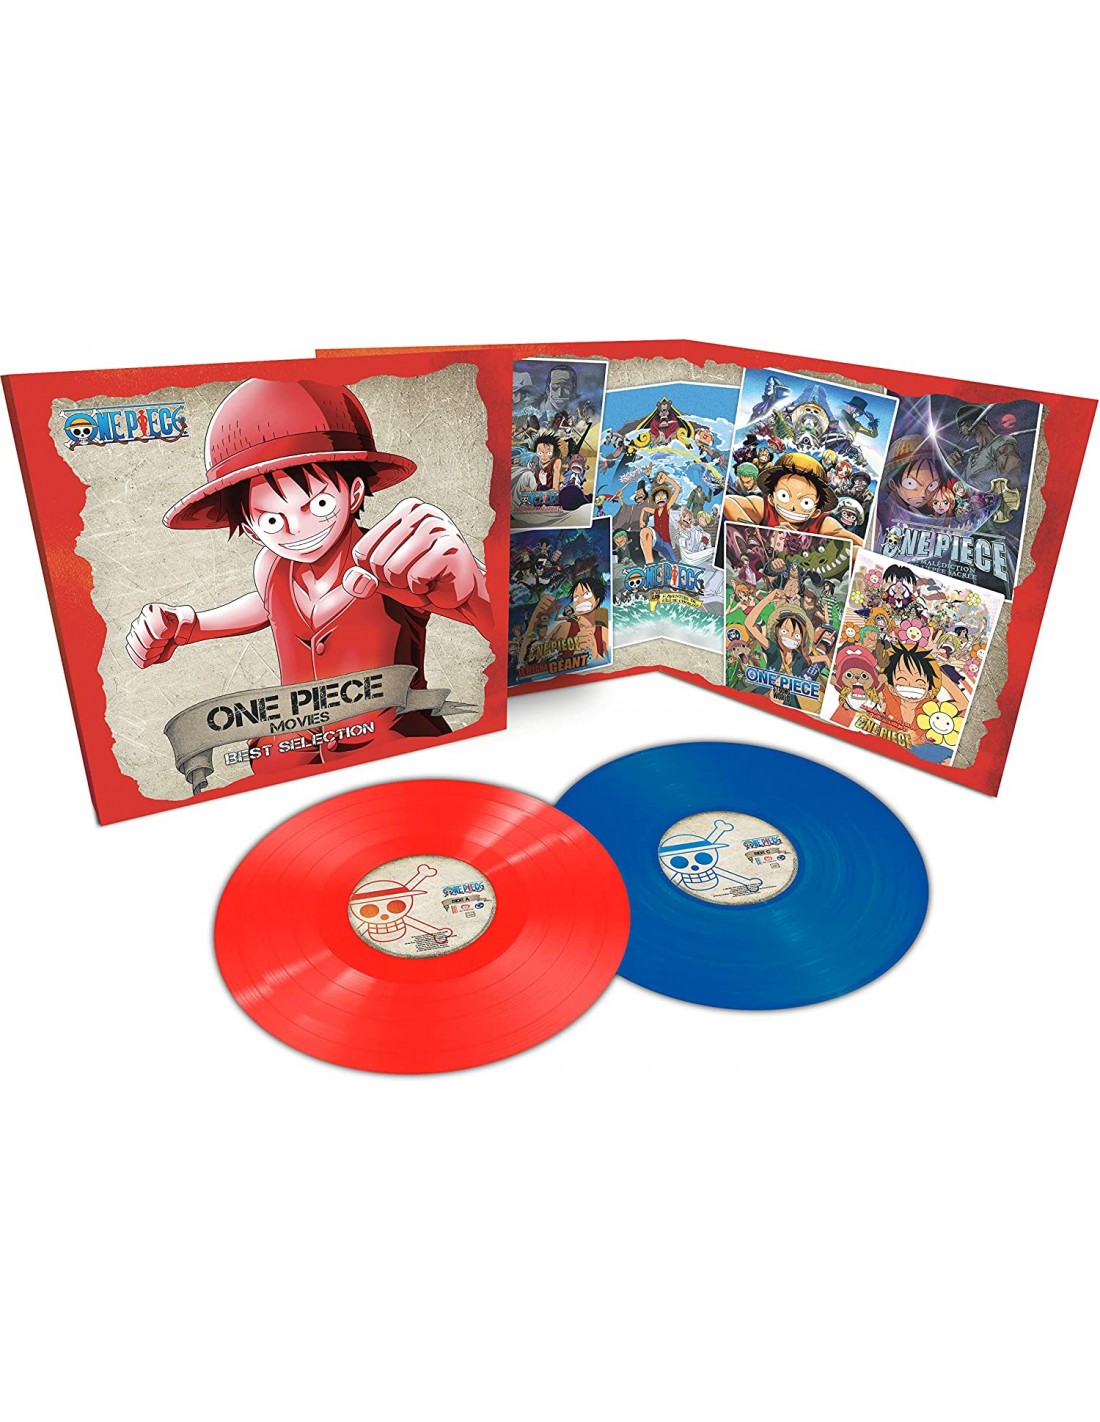 Merchandising - Vinilo One Piece Movies Best Collection - Red/Blue